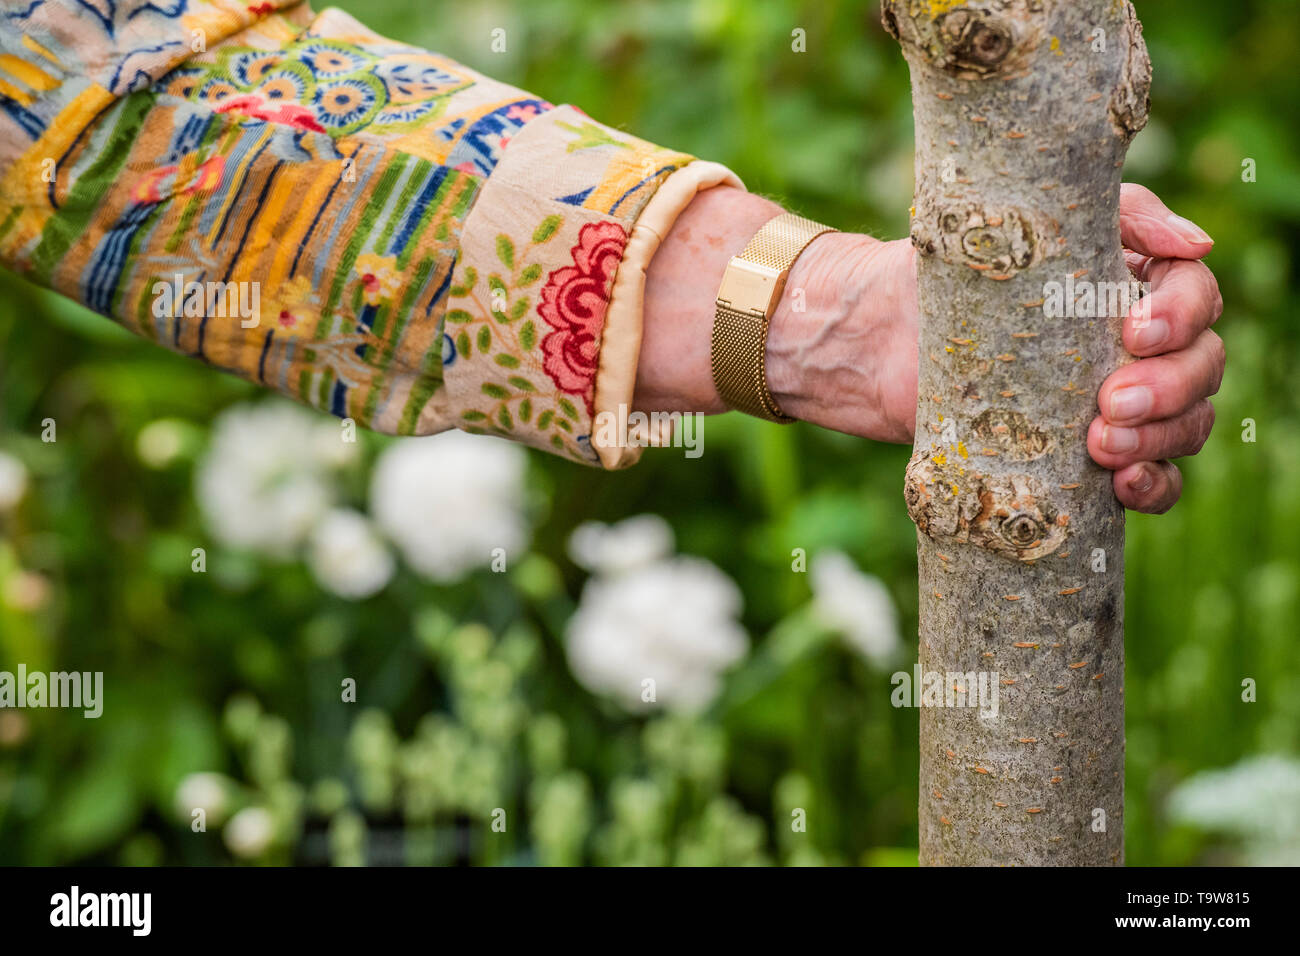 London, UK. 20th May, 2019. Dame Judi Dench launches a re-elming initiative on the Hillier Nurseries stand - Press preview day at The RHS Chelsea Flower Show. Credit: Guy Bell/Alamy Live News Stock Photo